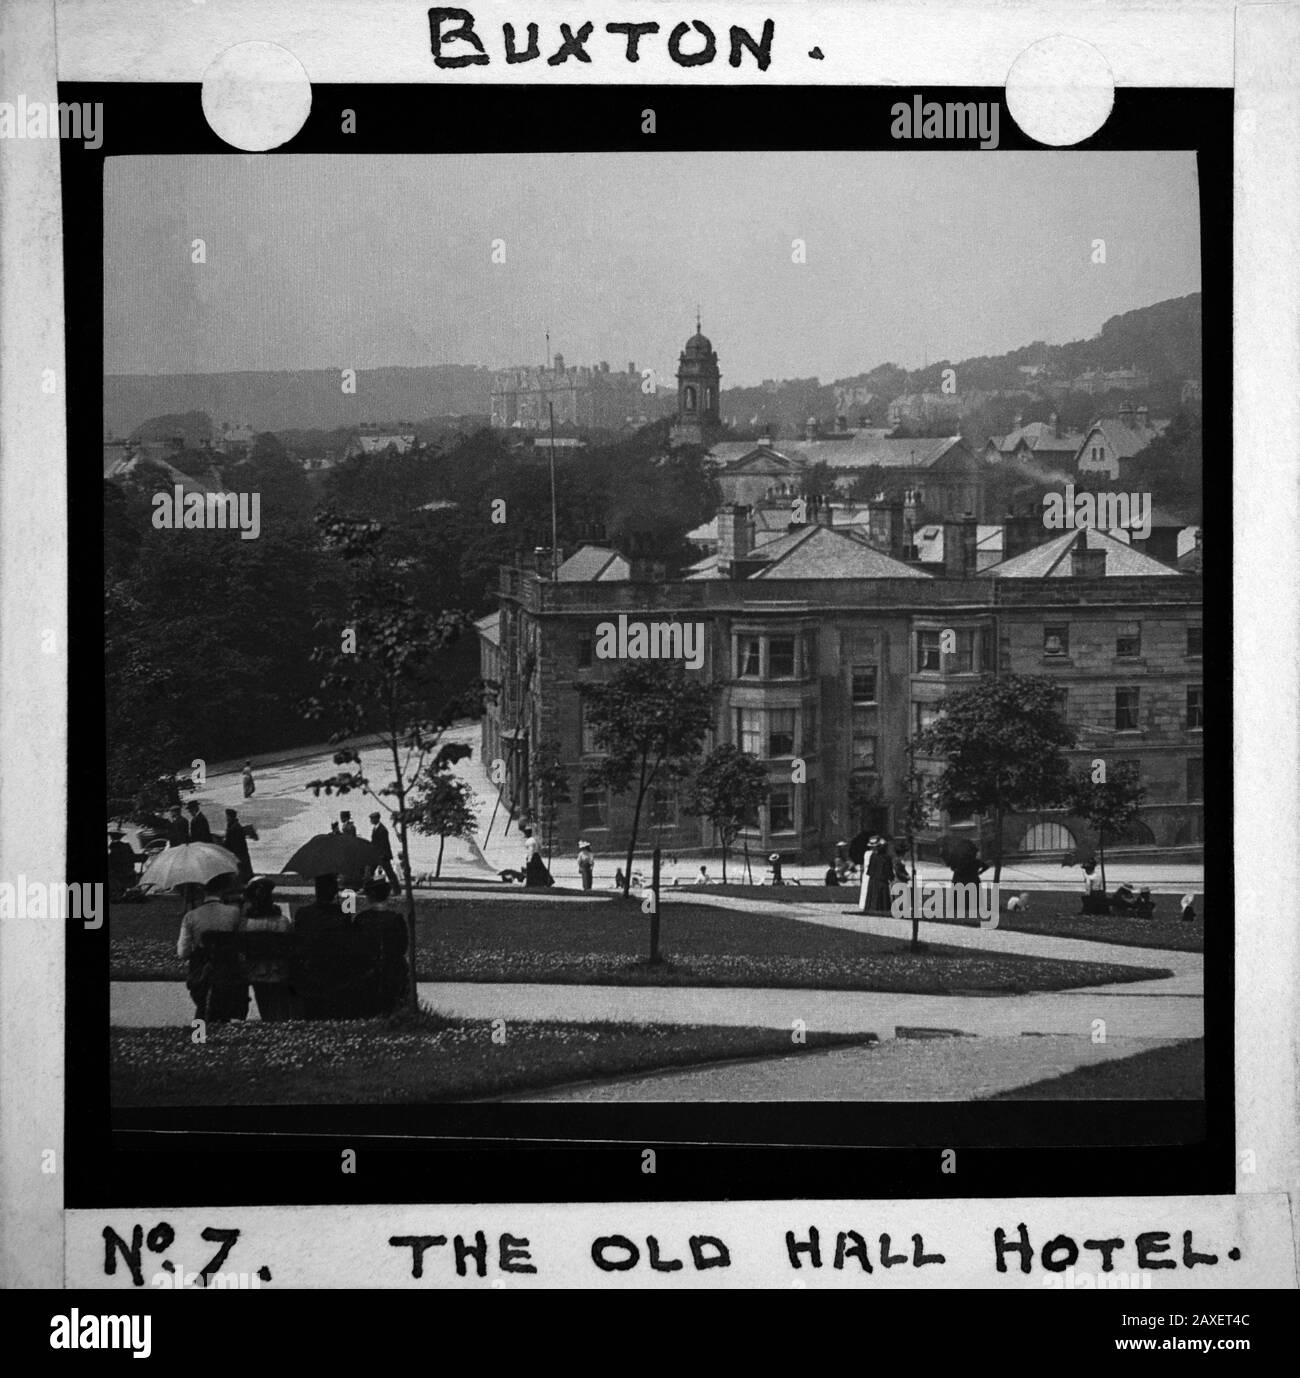 The old Hall Hotel, Buxton Crescent & Thermal Spa Hotel & Palace Hotel during the Victorian period c1890, Victorians in front of the Bath House, antique old glass magic lantern slide picture. The newly renovated hotel is due to open in 2020 creating a northern capital for health and wellbeing. Antique Magic Lantern Slide.  Original photographer unknown, copyright period expired.  Digital photography, restoration, editing copyright © Doug Blane. Stock Photo